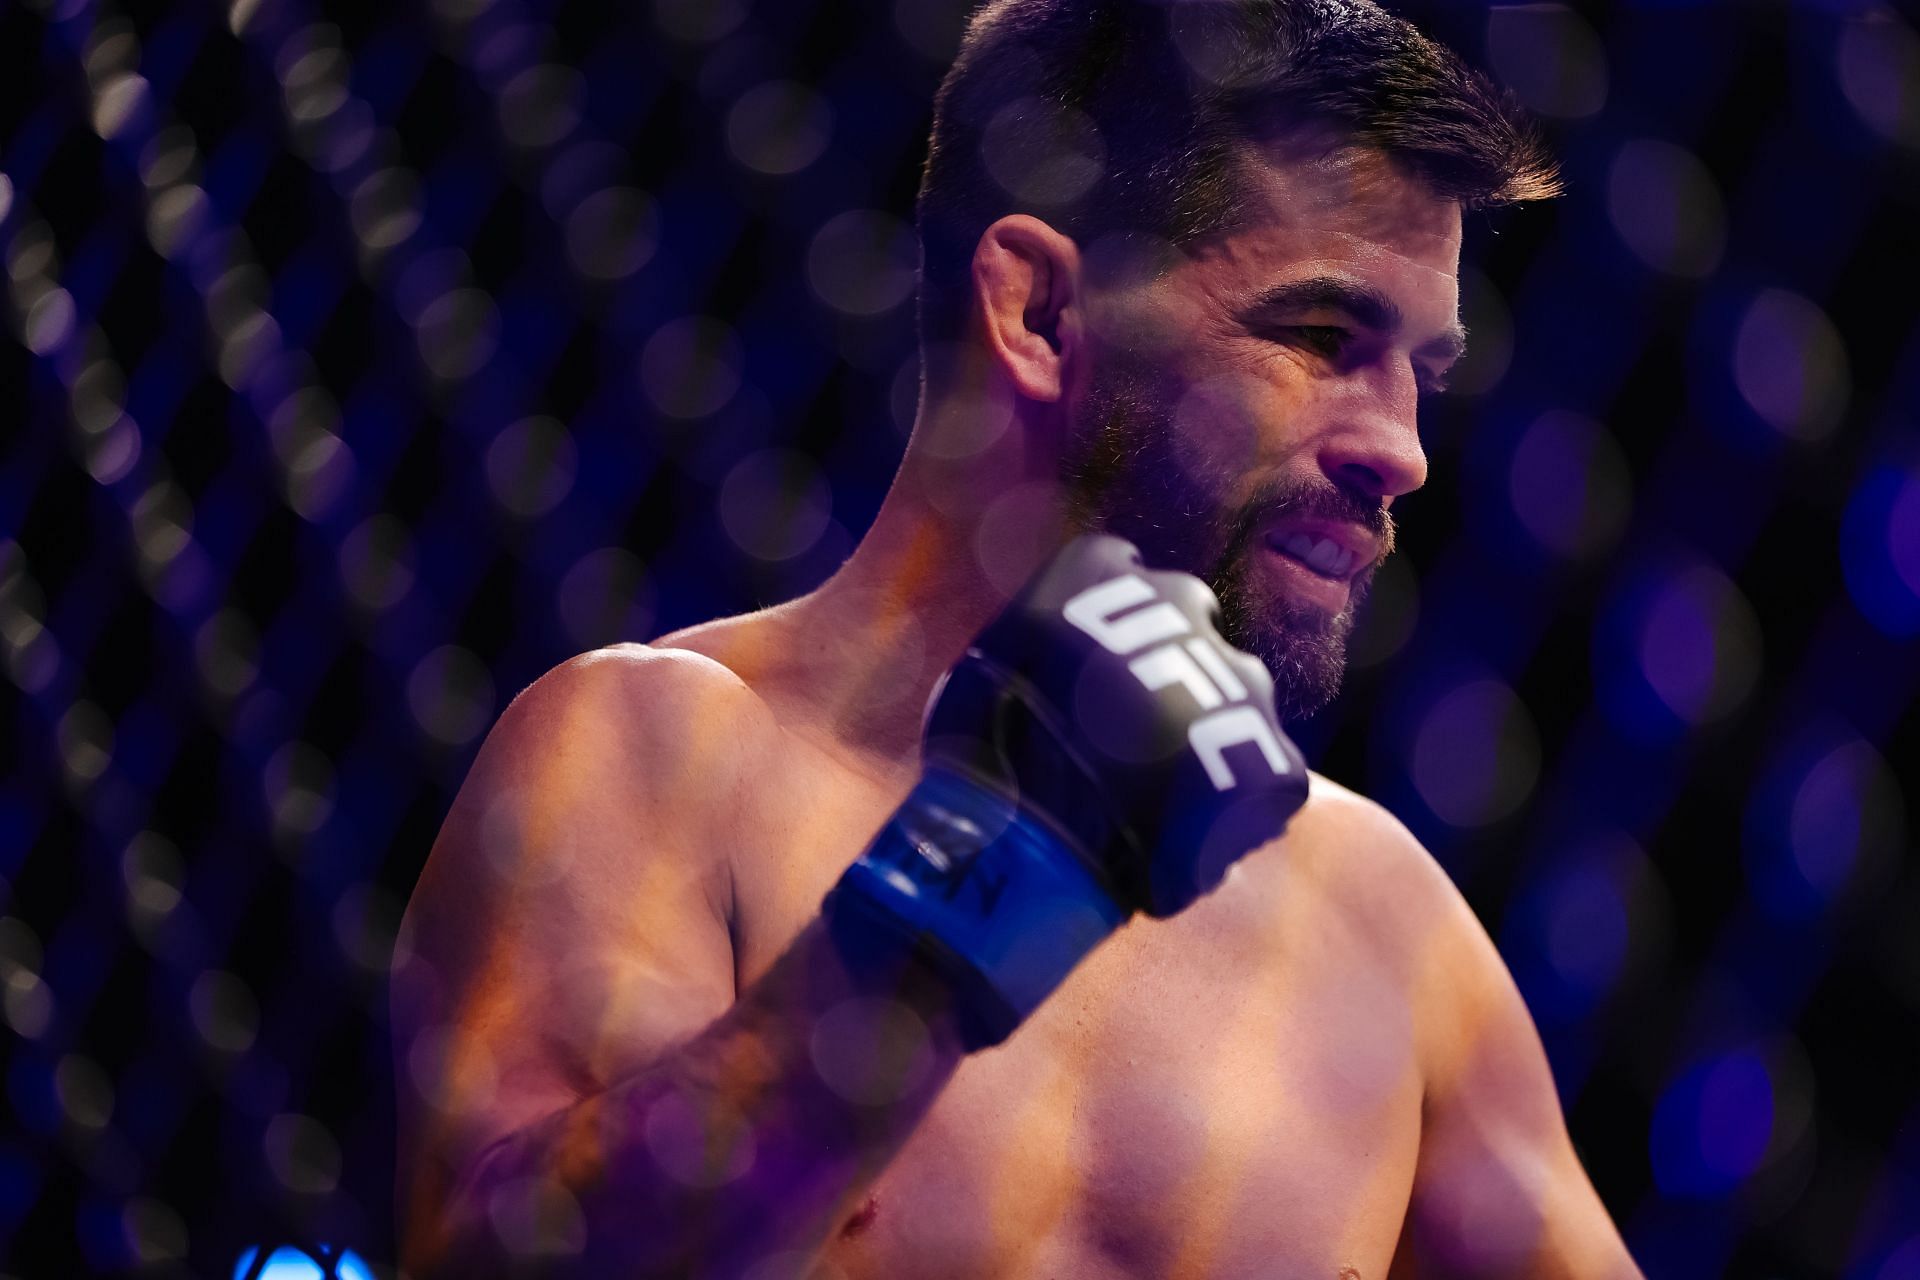 Could the legendary Dominick Cruz welcome Deiveson Figueiredo to the bantamweight division?